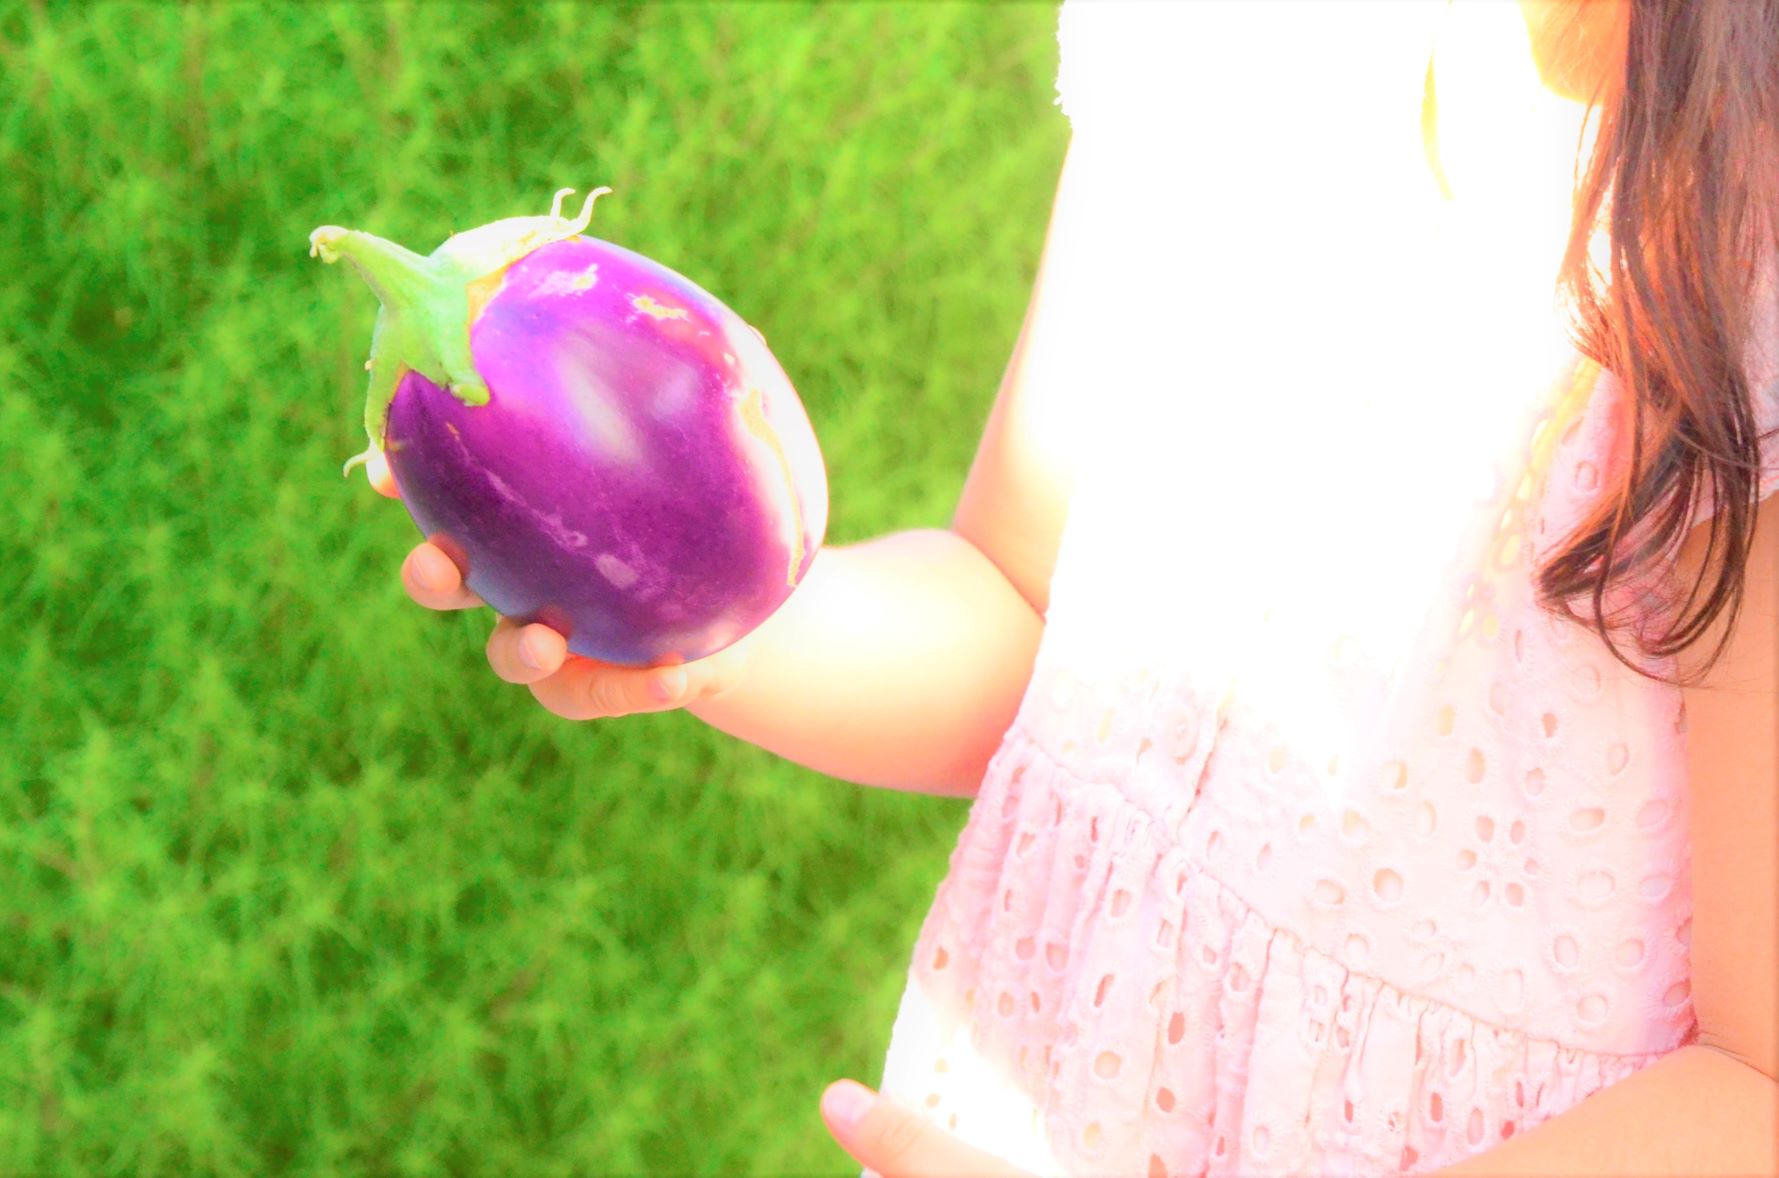 We were able to harvest a lot of eggplants this summer.